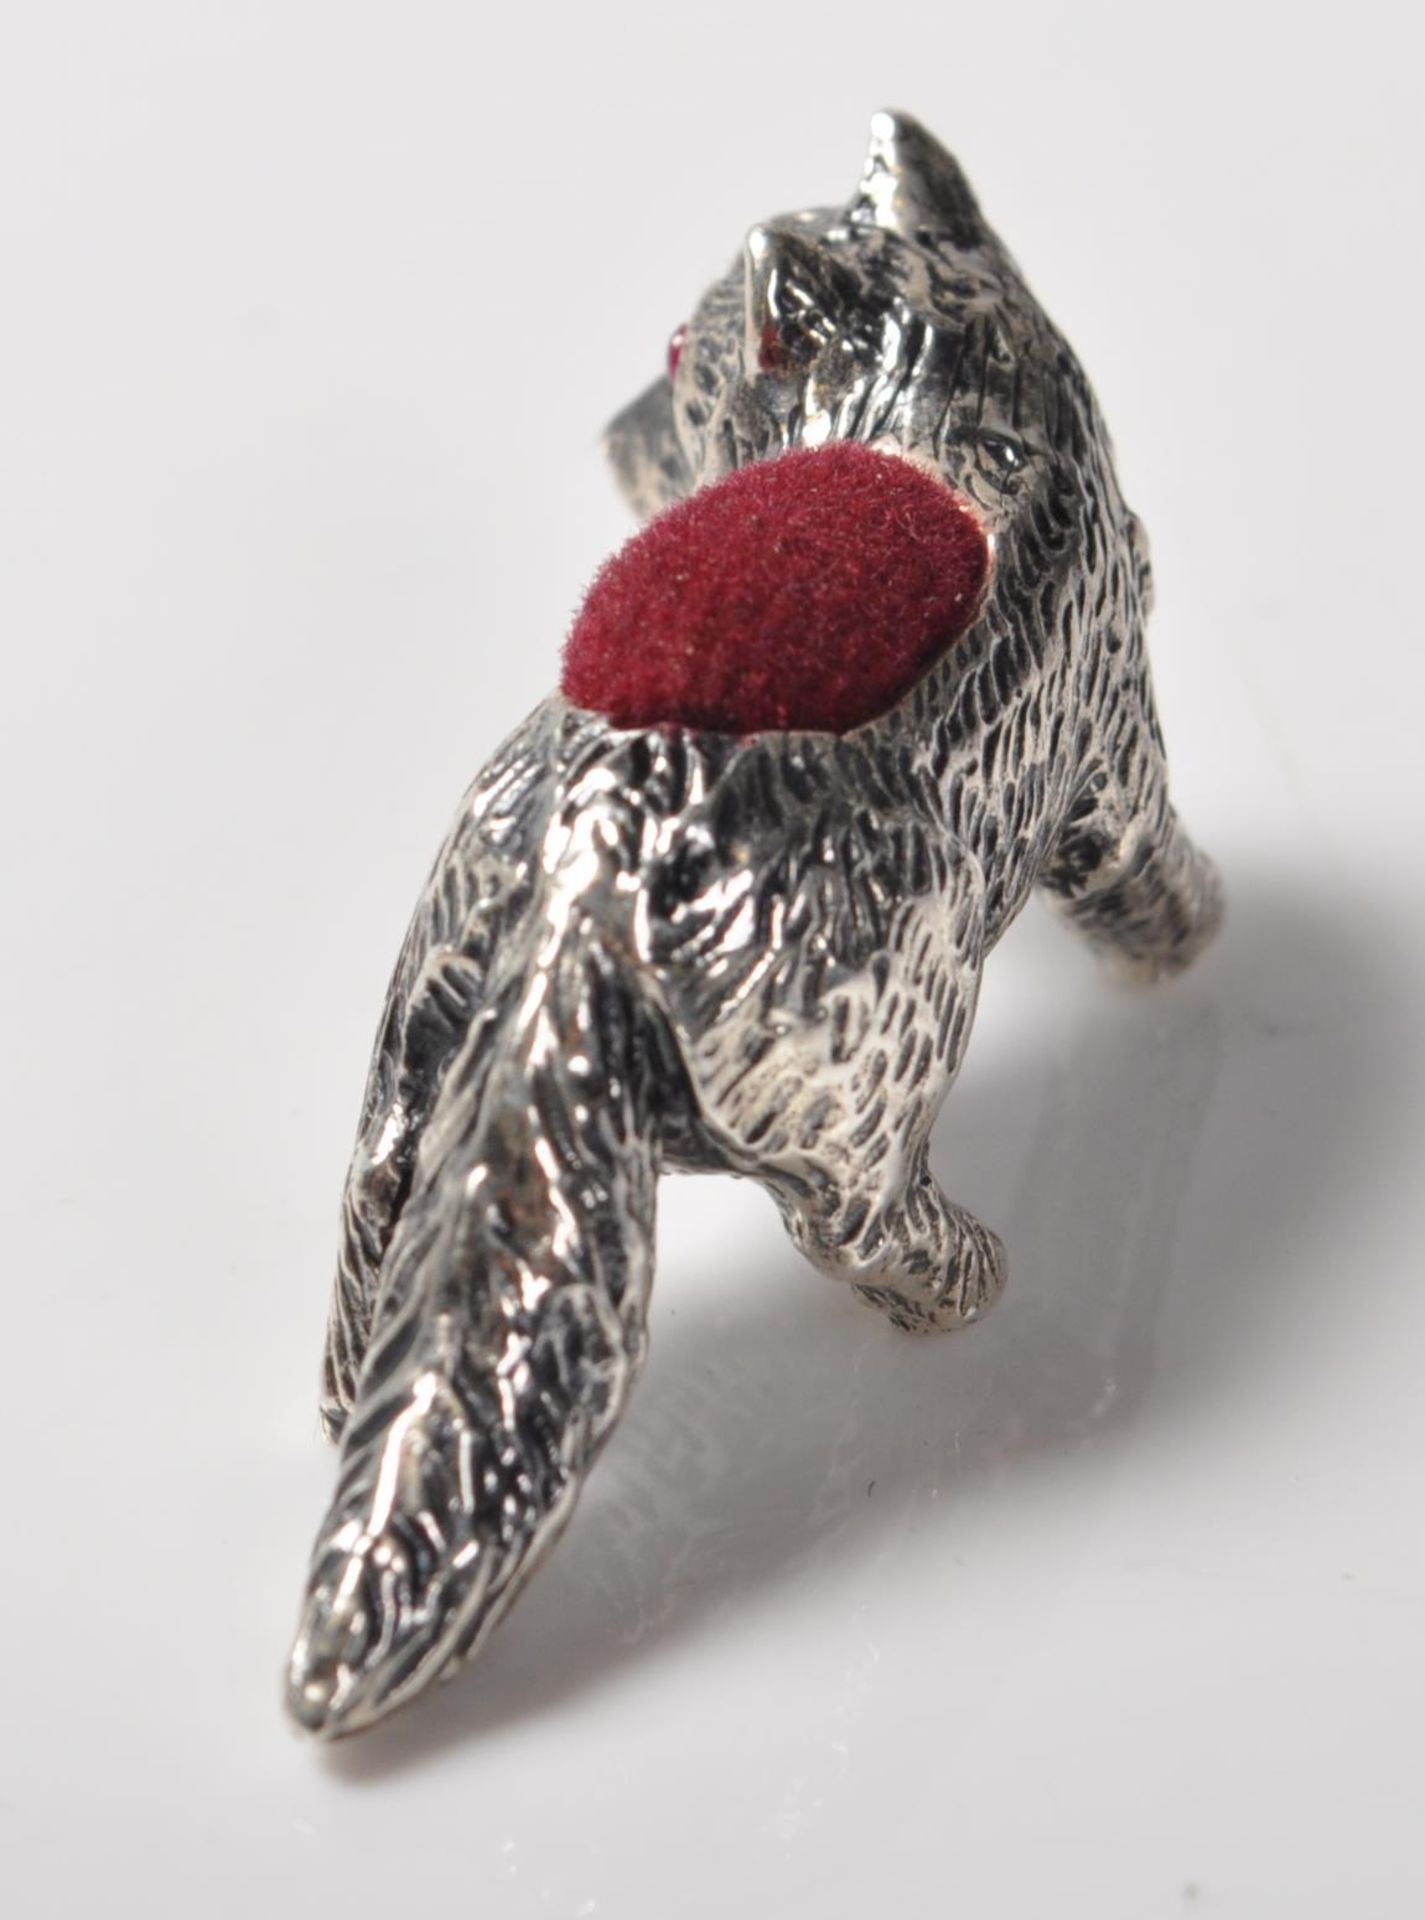 STAMPED STERLING SILVER PINCUSHION IN THE FORM OF A FOX - Image 3 of 6